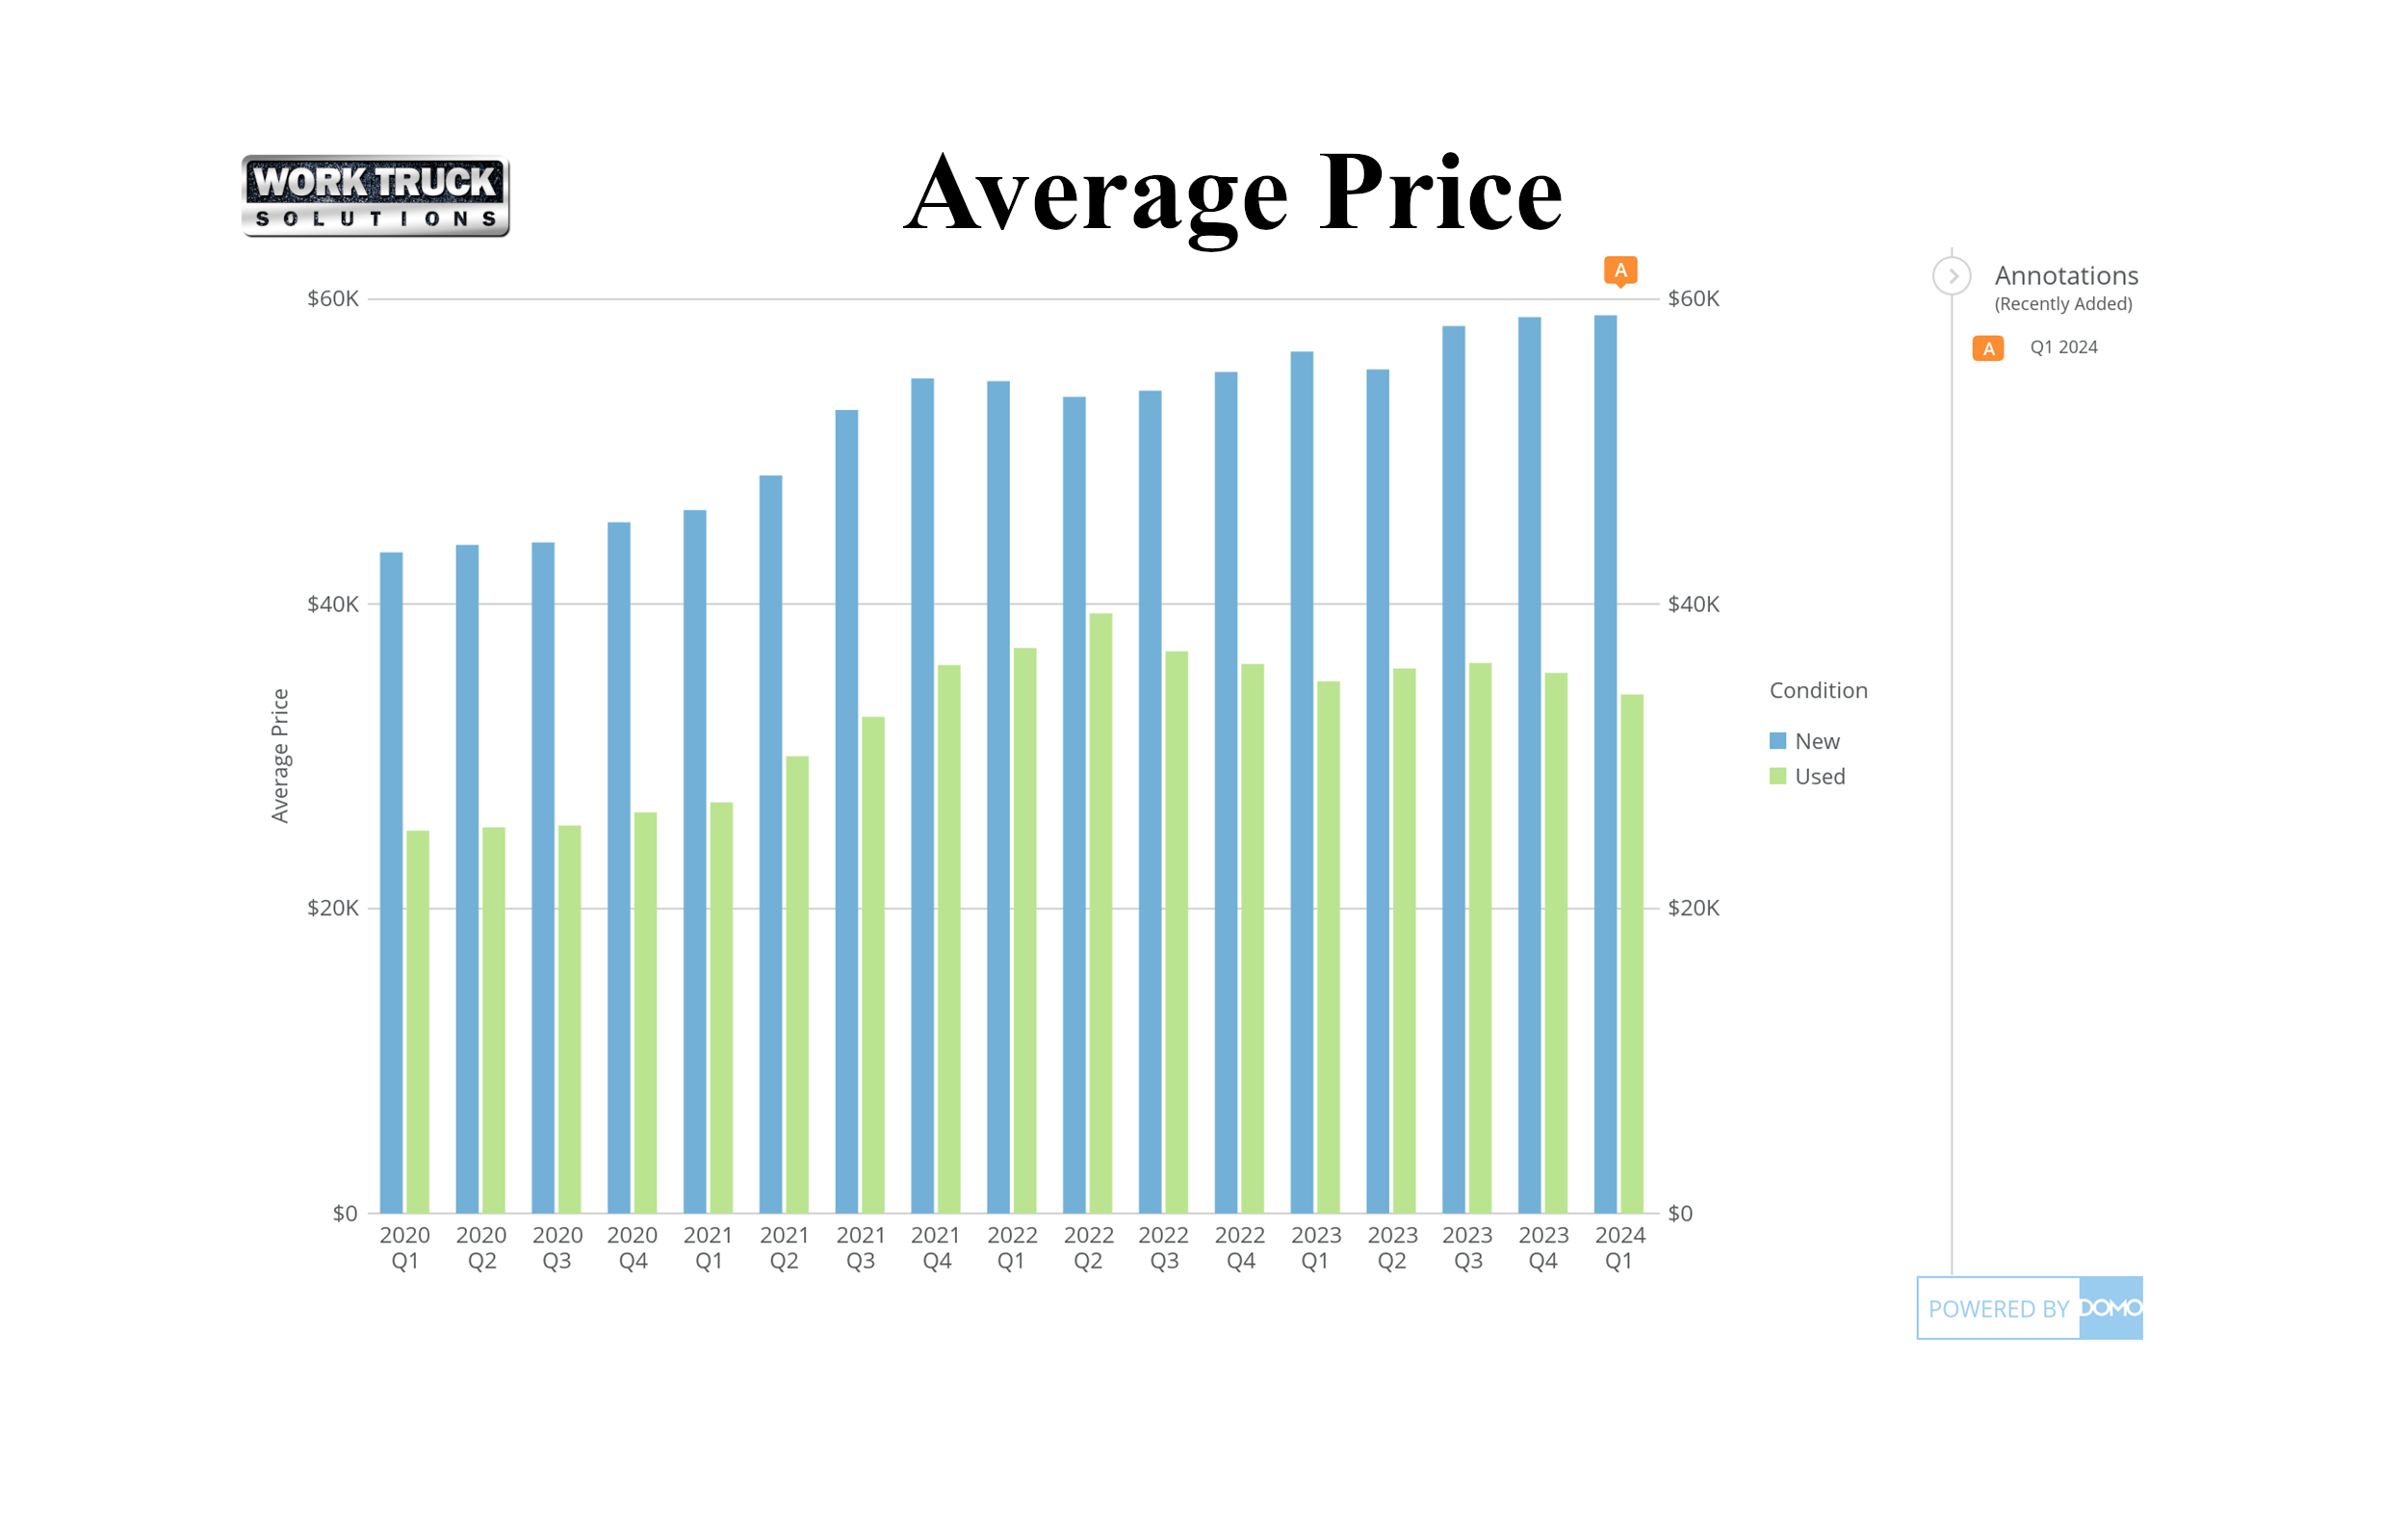 Average Prices for Commercial Vehicles 